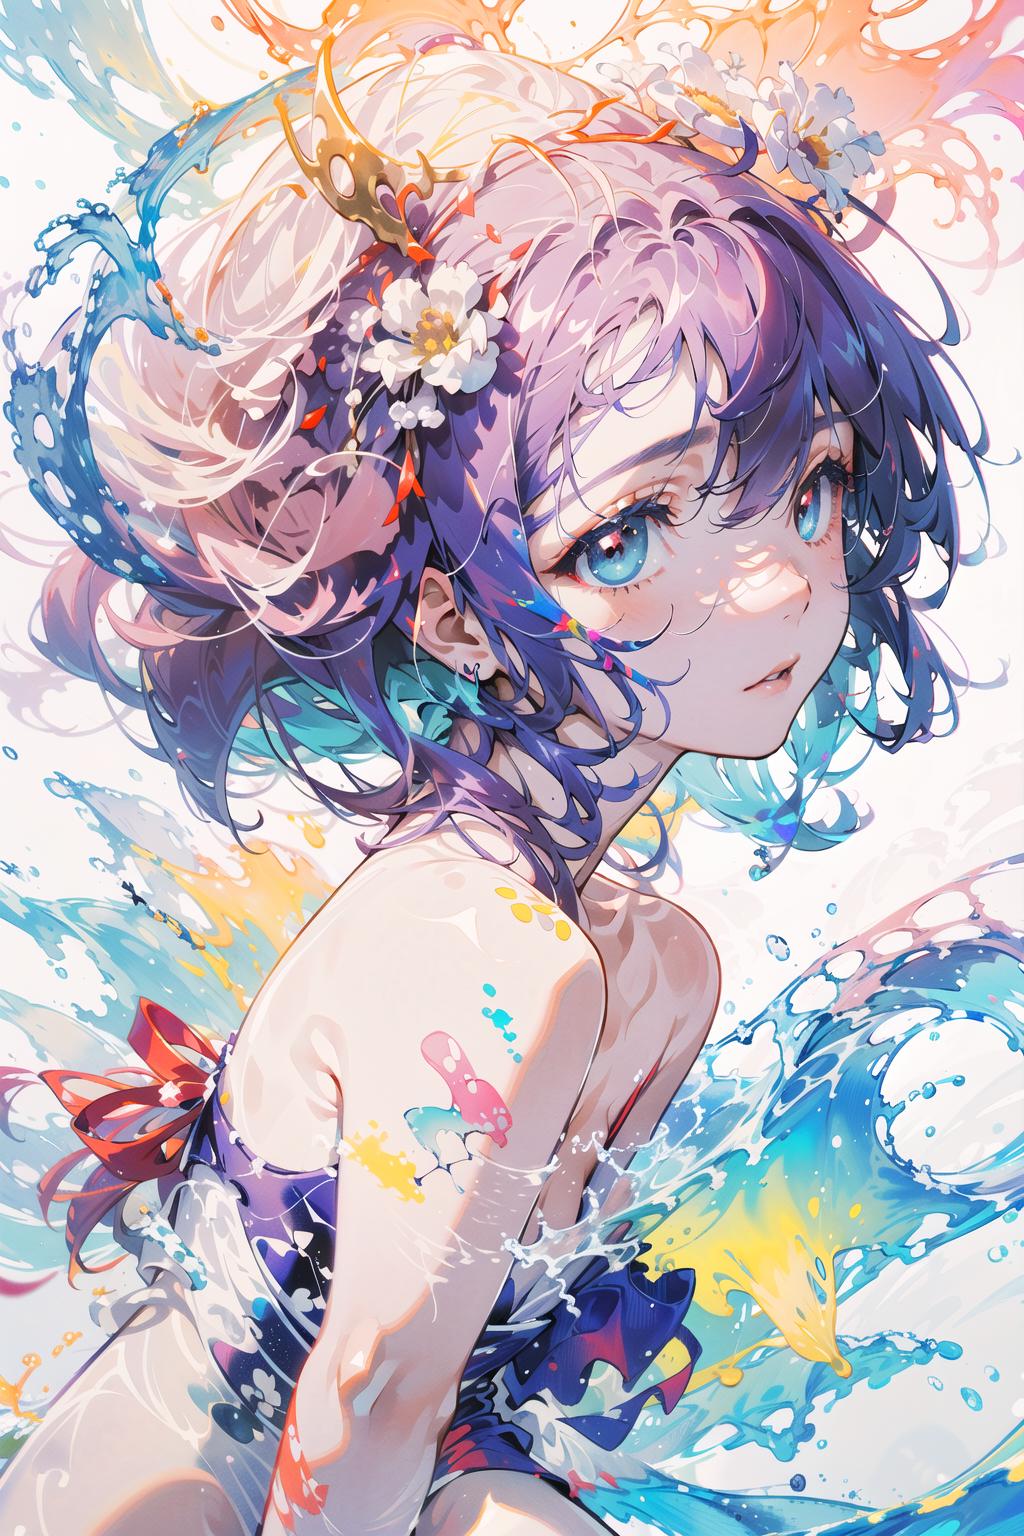 Anime girl with purple hair and blue eyes standing in a water scene.